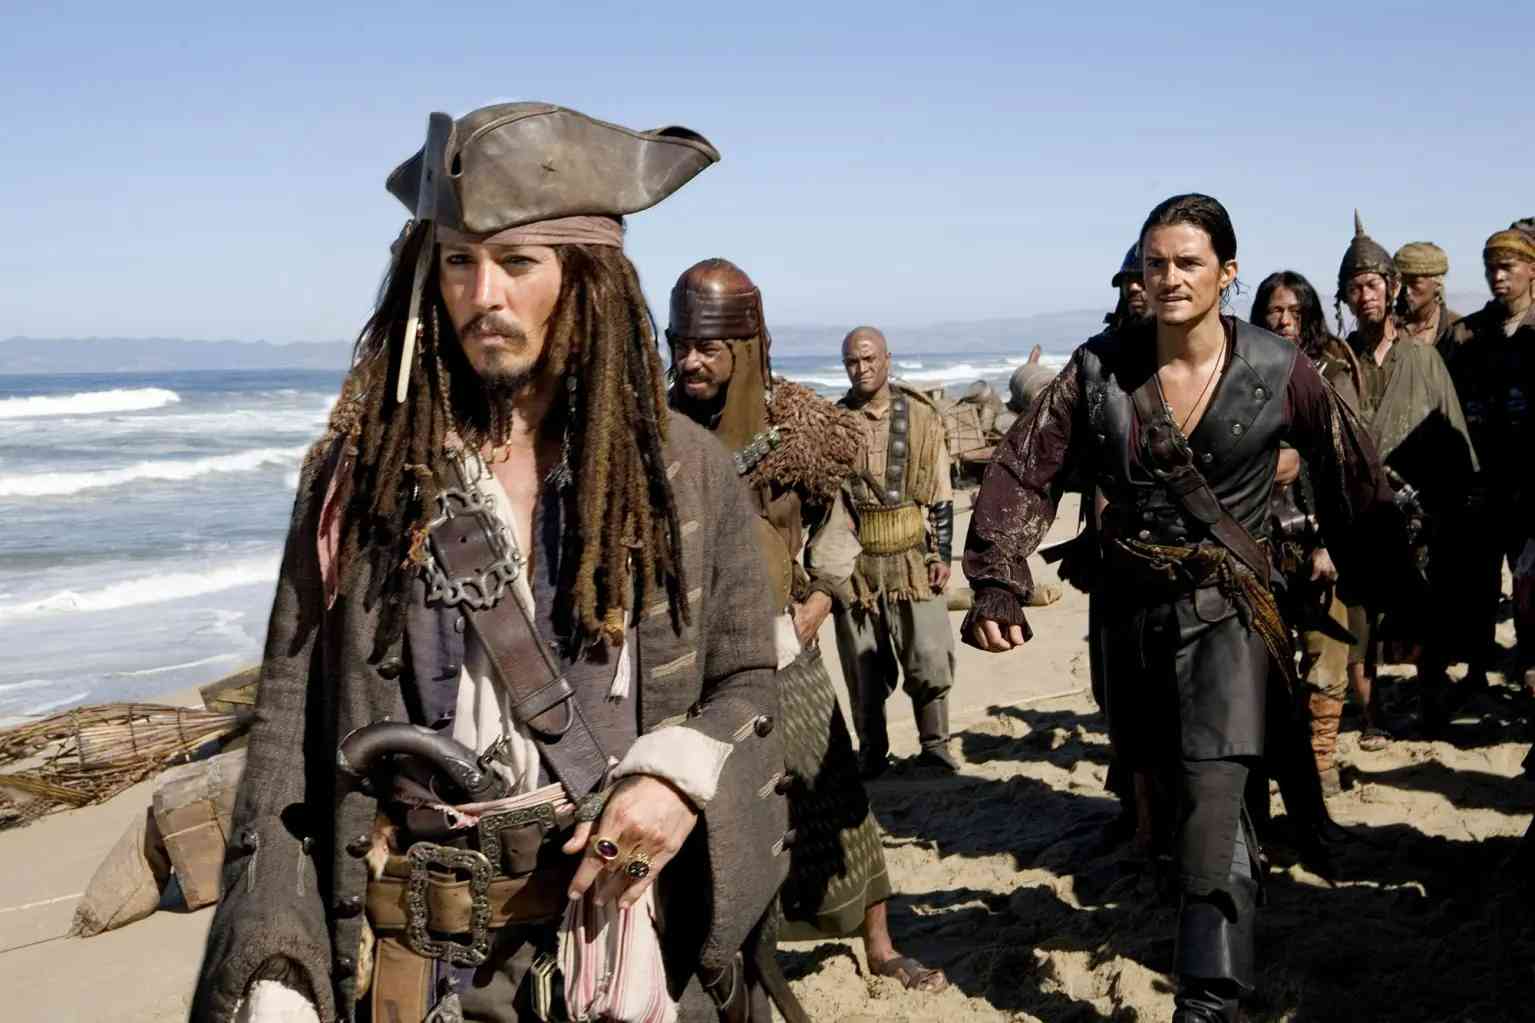 Pirates-of-the-Caribbean:-At-World's-End-in-Hong Kong